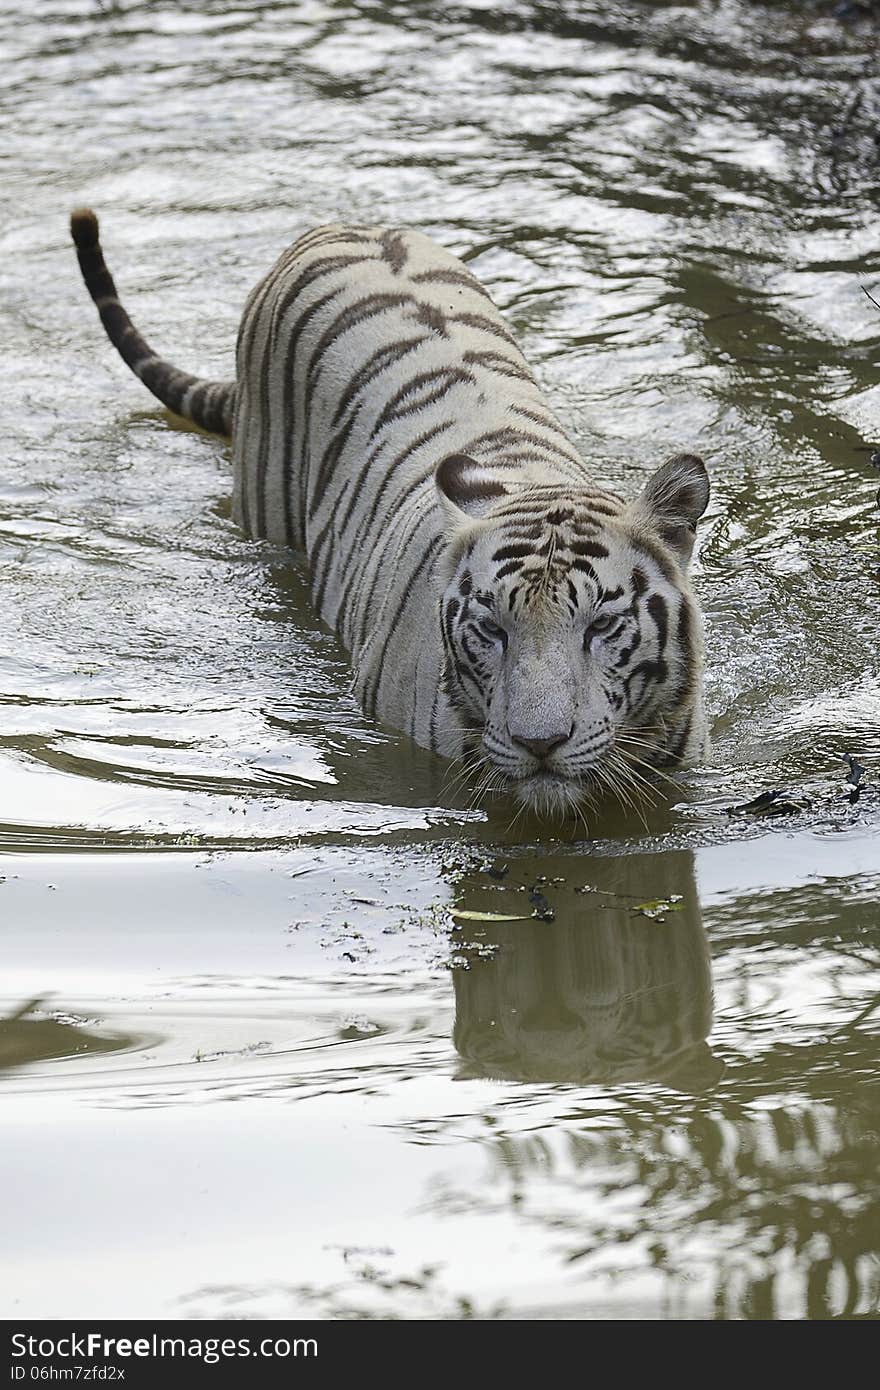 The white tiger is a rare pigmentation variant of the Bengal tiger, which is reported in the wild from time to time in Assam, Bengal, Bihar and especially in the former State of Rewa.